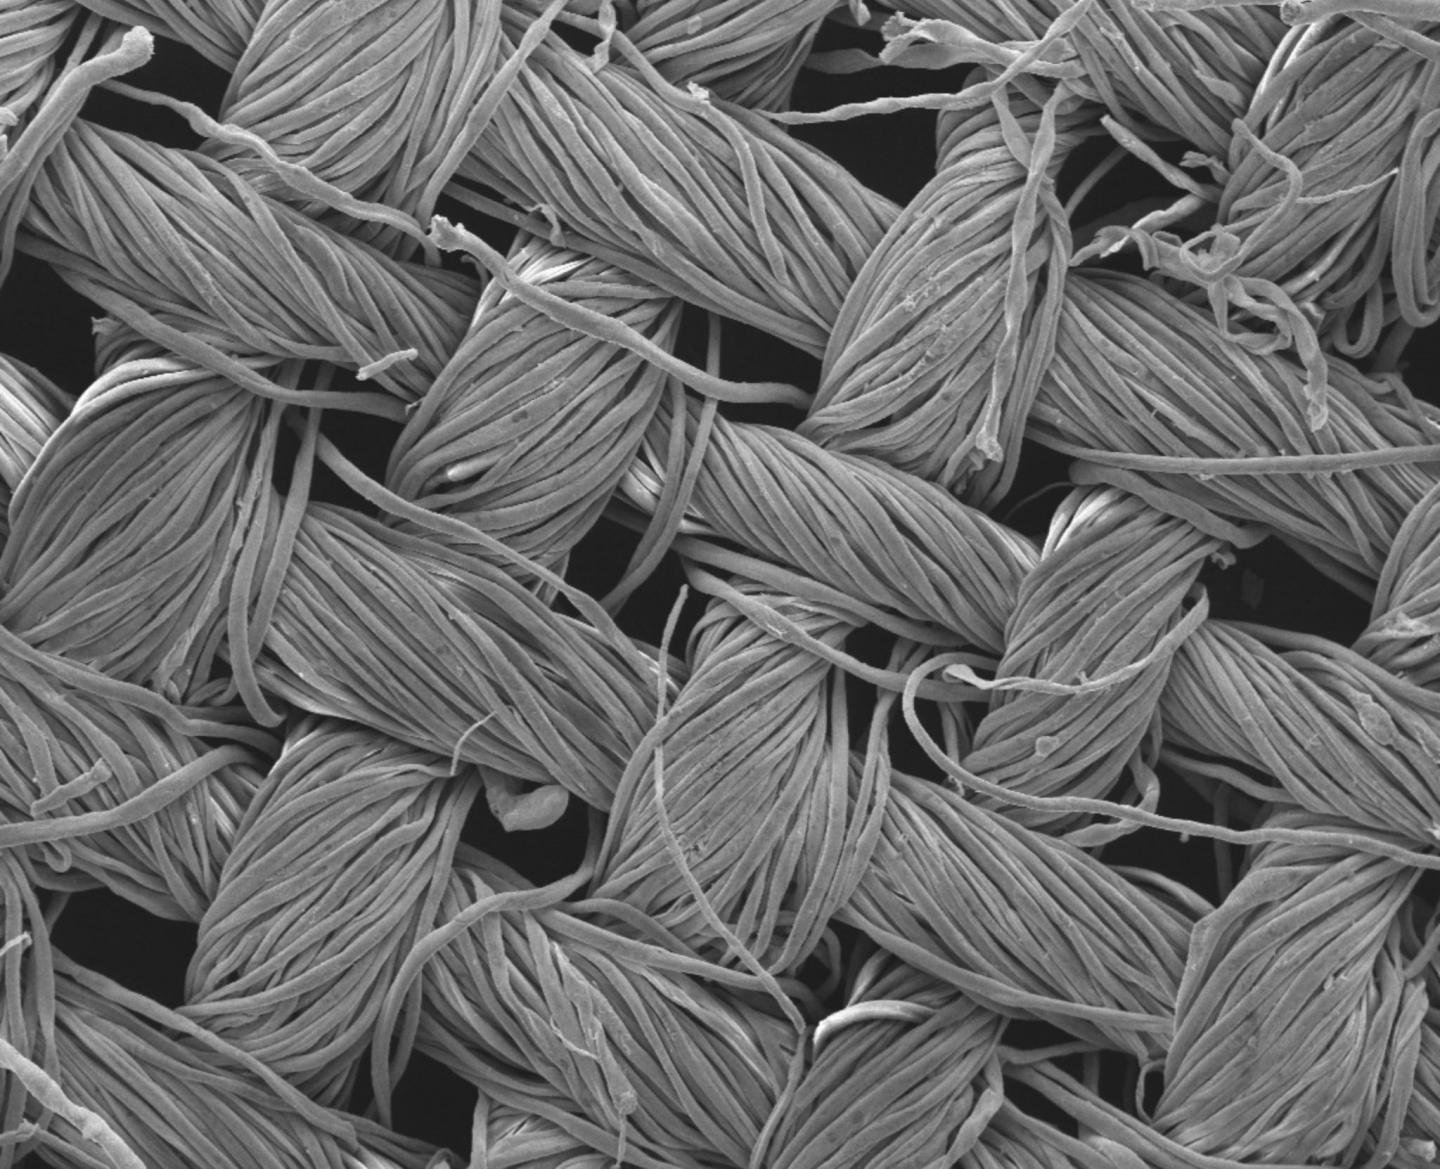 Self-Cleaning Textiles